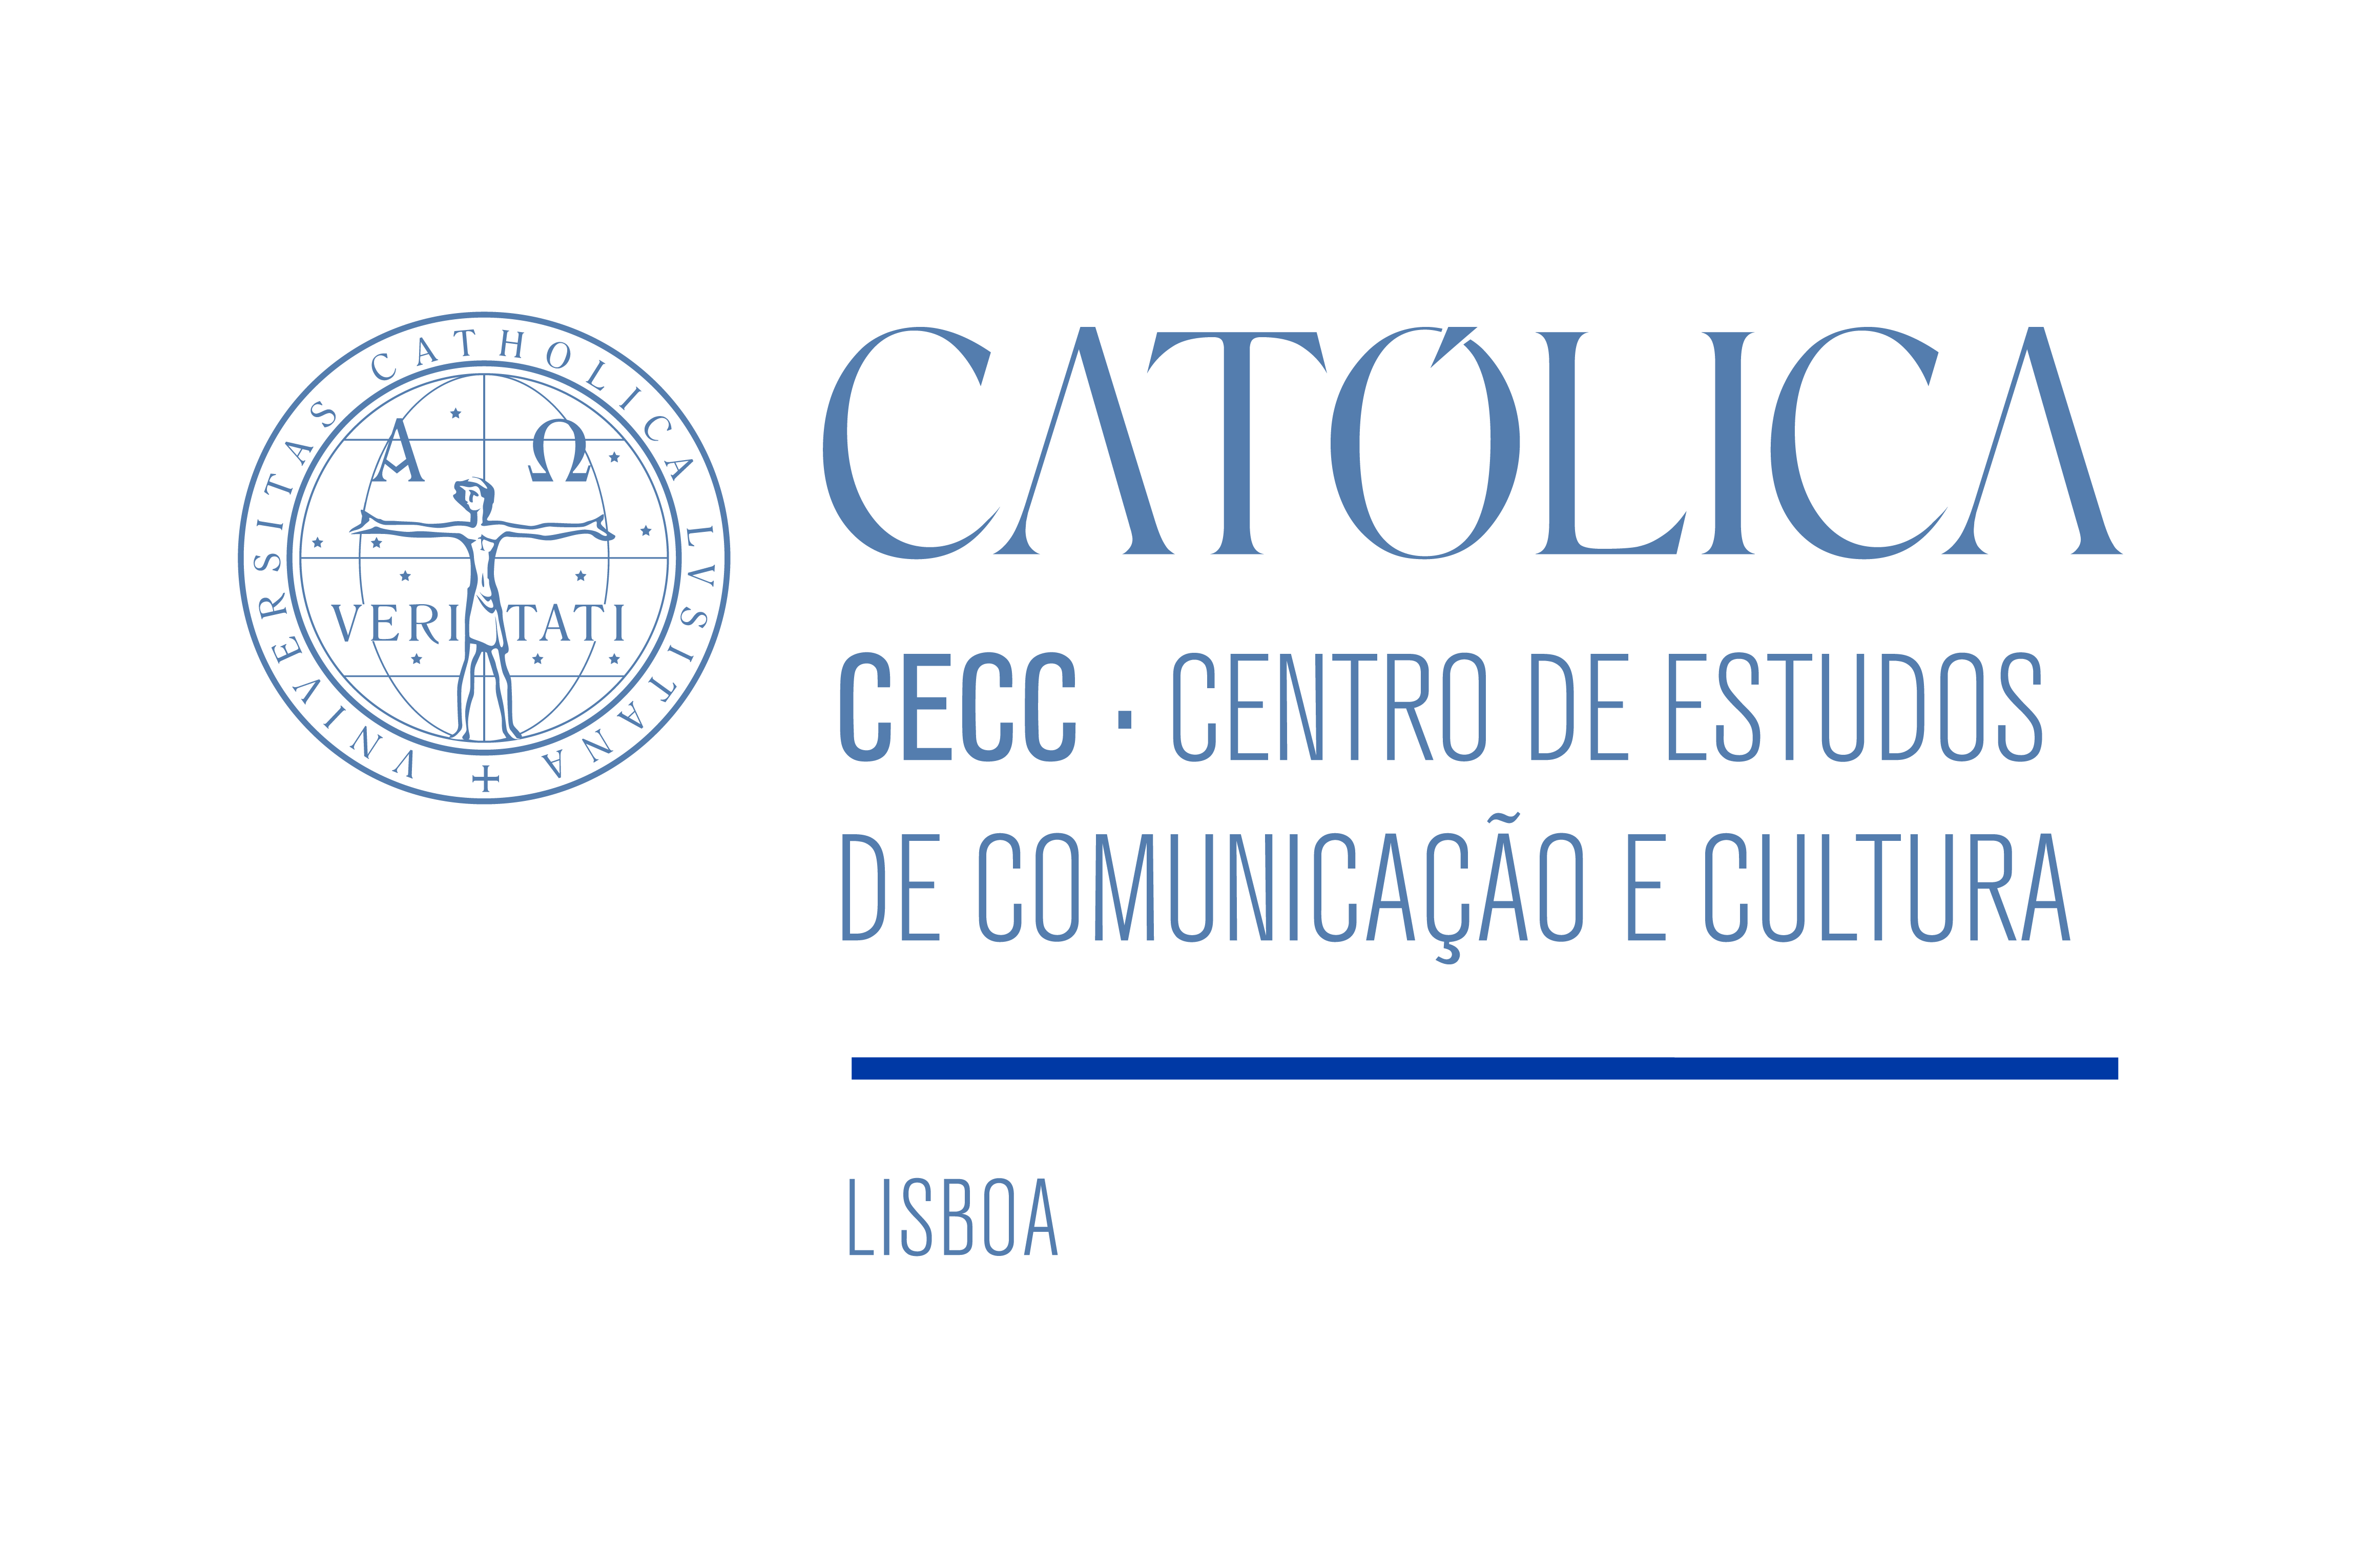 UCP – Research Centre for Communication and Culture